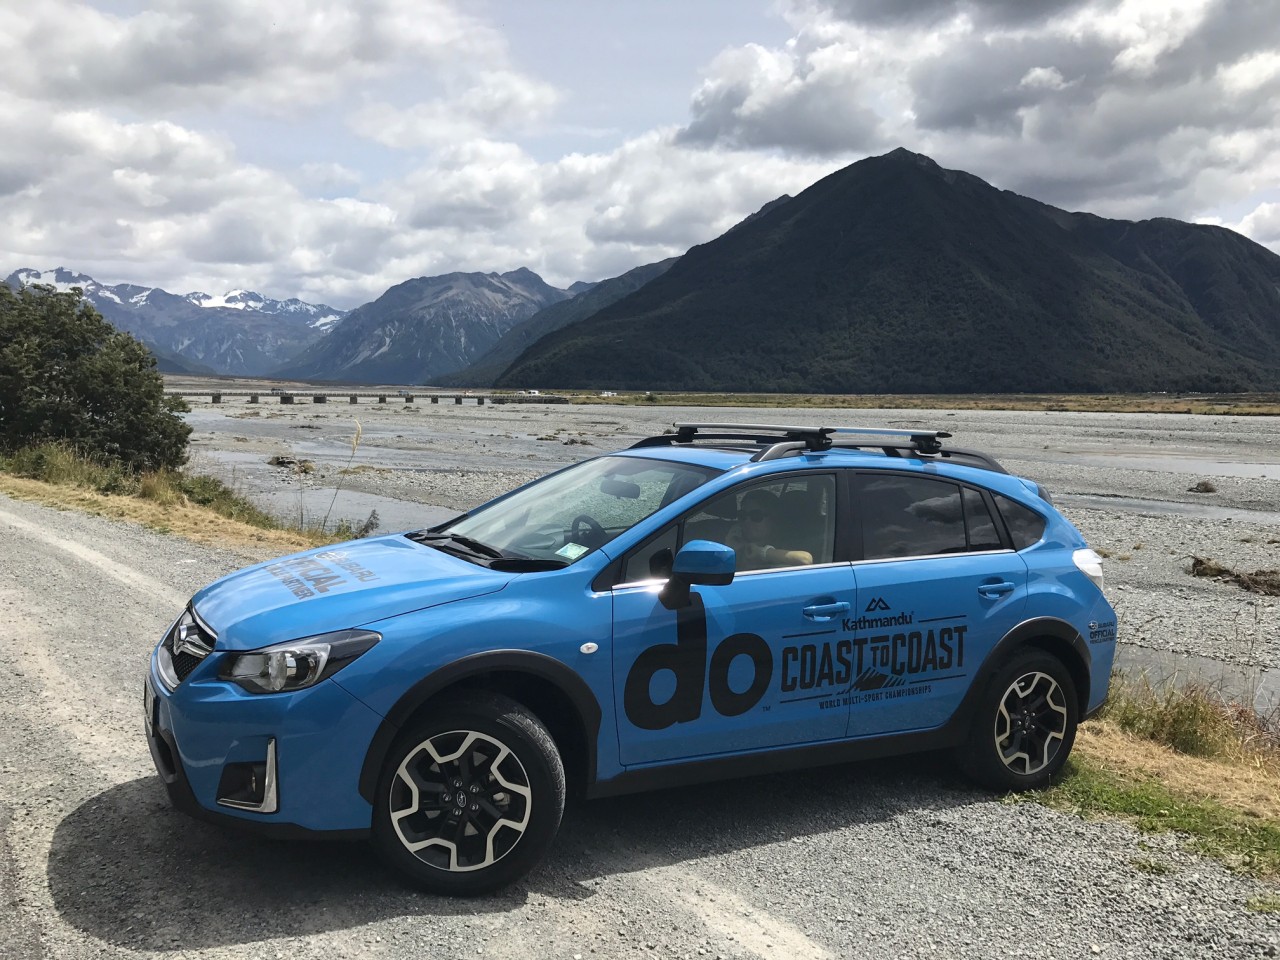 Subaru was the official vehicle supplier for the Kathmandu Coast to Coast and three ‘do’ branded SUVs were on duty on the West Coast to East Coast of the South Island course today and yesterday. PHOTO: KATHMANDU COAST TO COAST